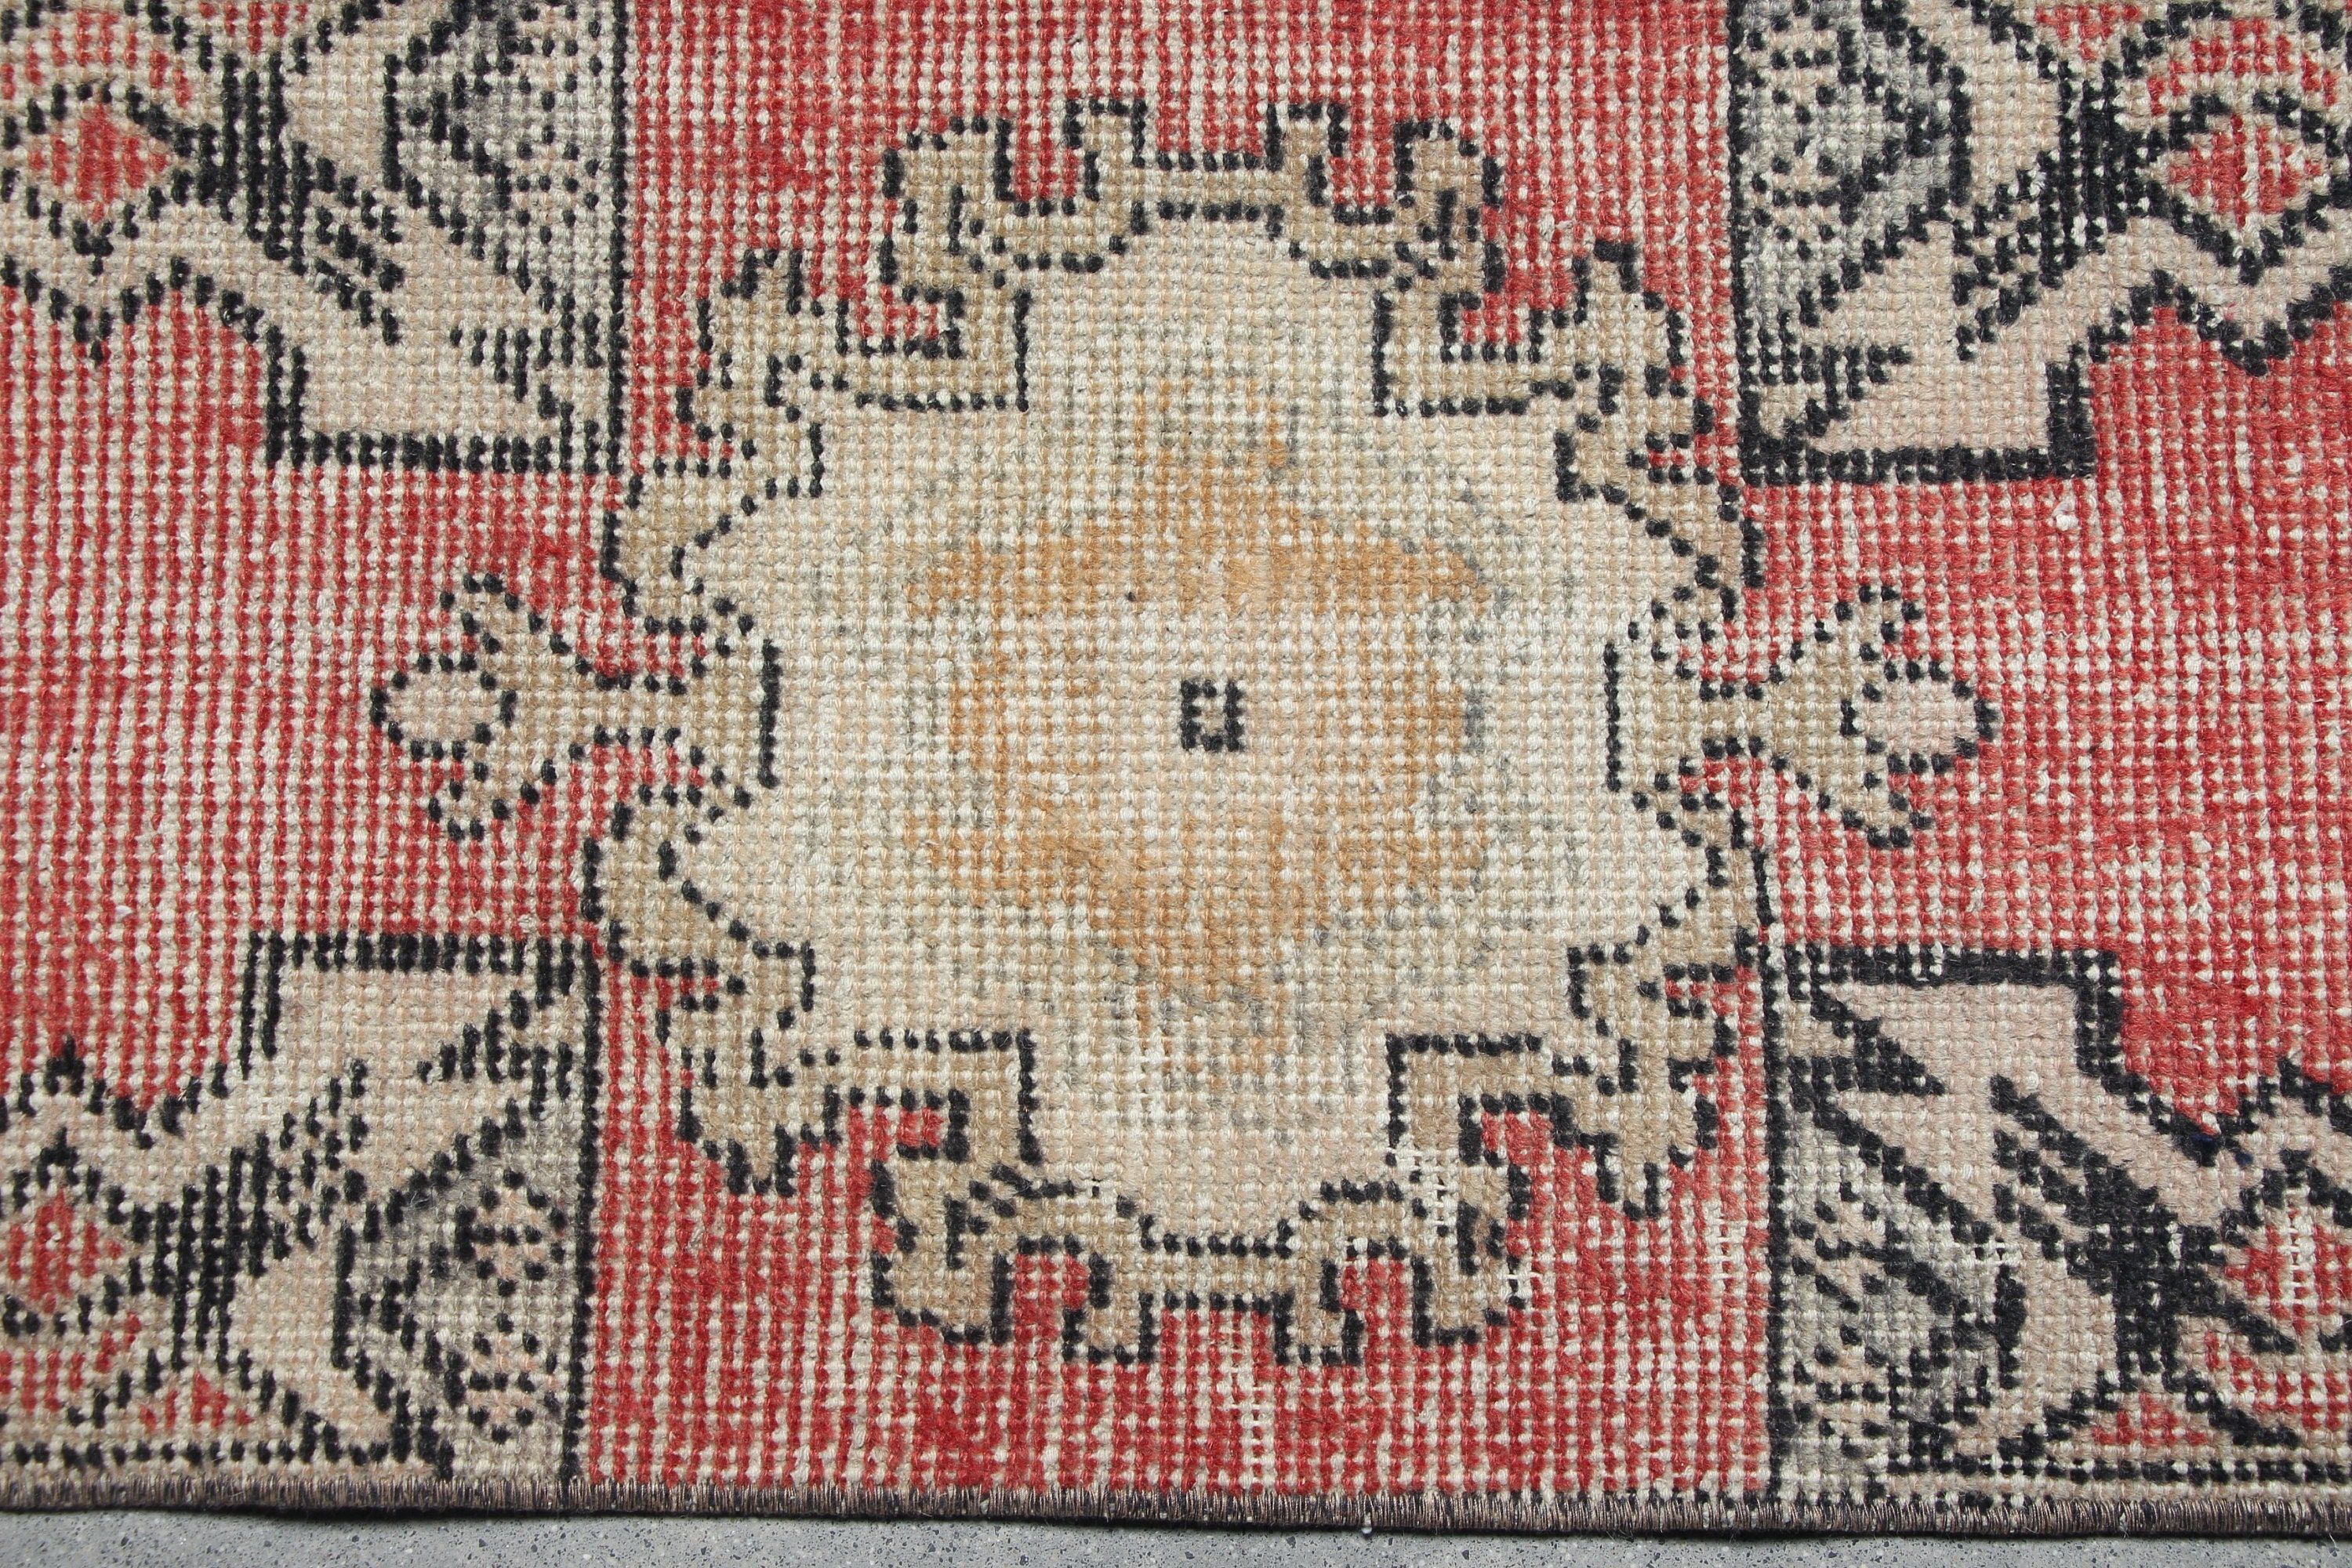 Moroccan Rug, Wall Hanging Rugs, Vintage Rug, Red Antique Rugs, Anatolian Rug, Retro Rugs, Turkish Rugs, Entry Rug, 1.3x2.6 ft Small Rugs